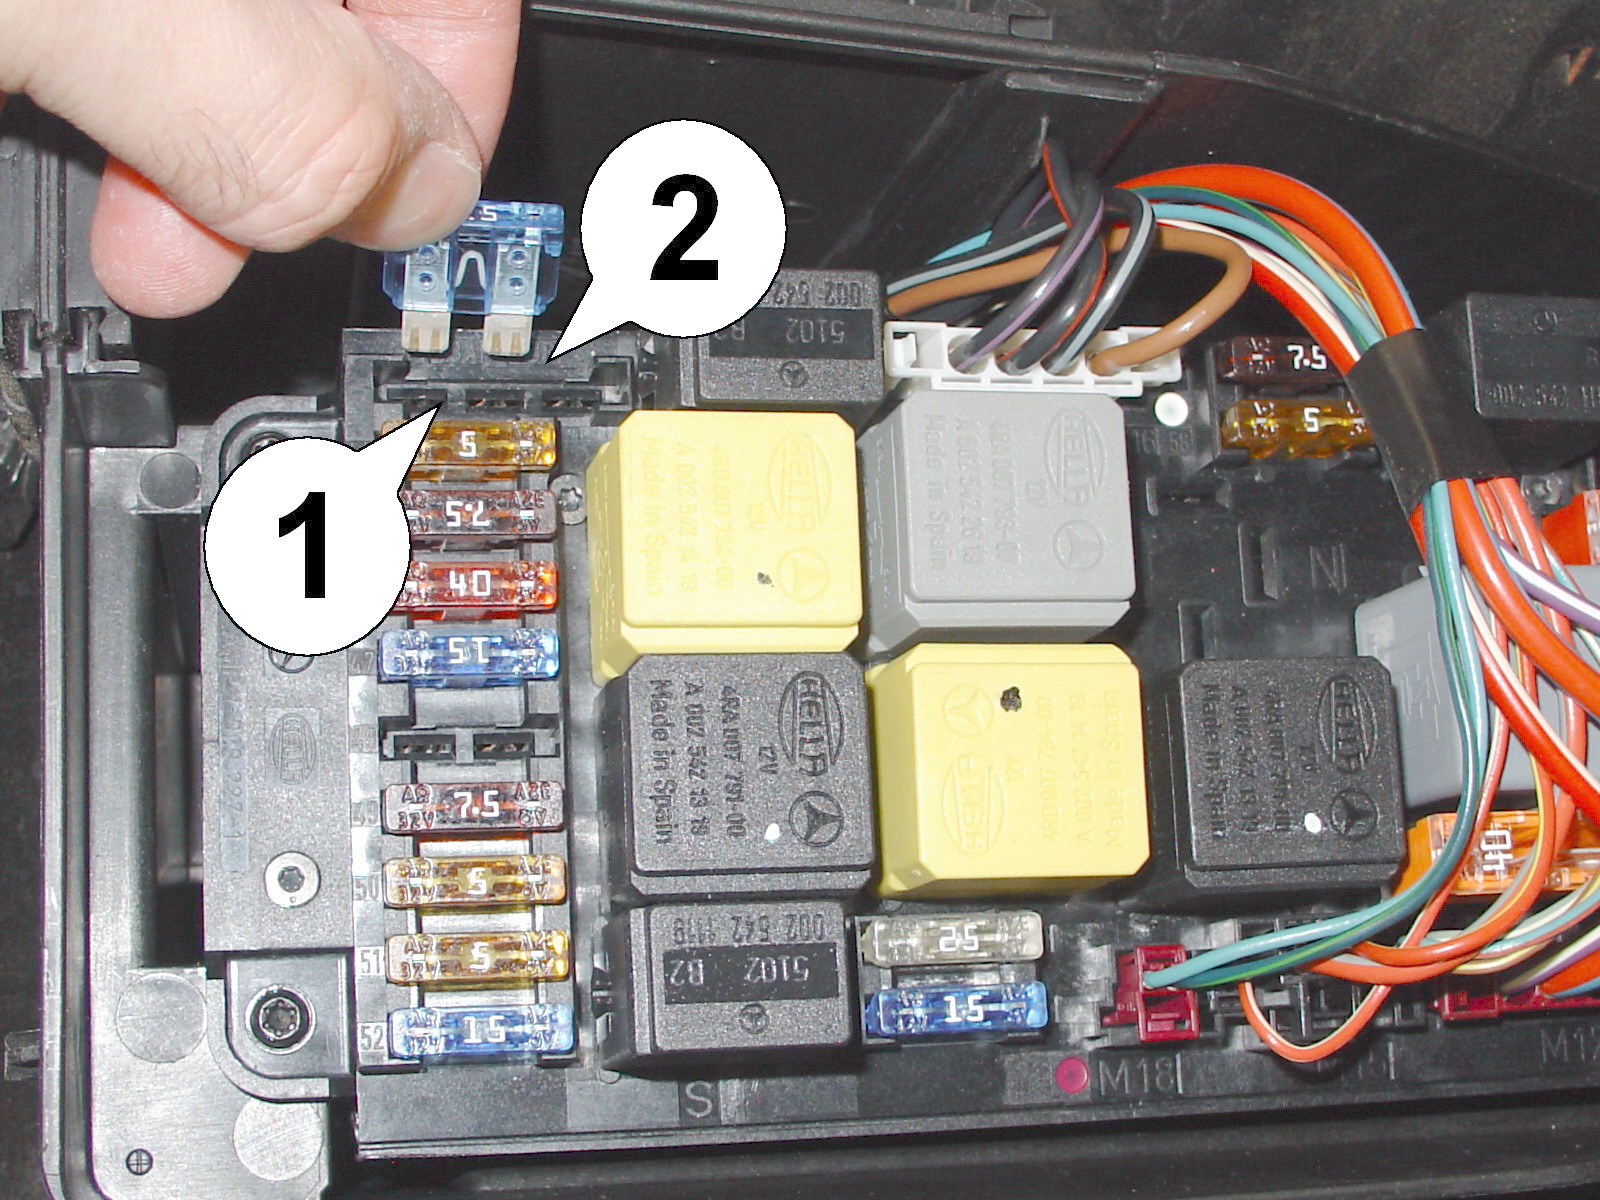 STLBMZ1 Mercedes SLK and CLK how to enable driving HORN chirps 2012 e 450 fuse box diagram 